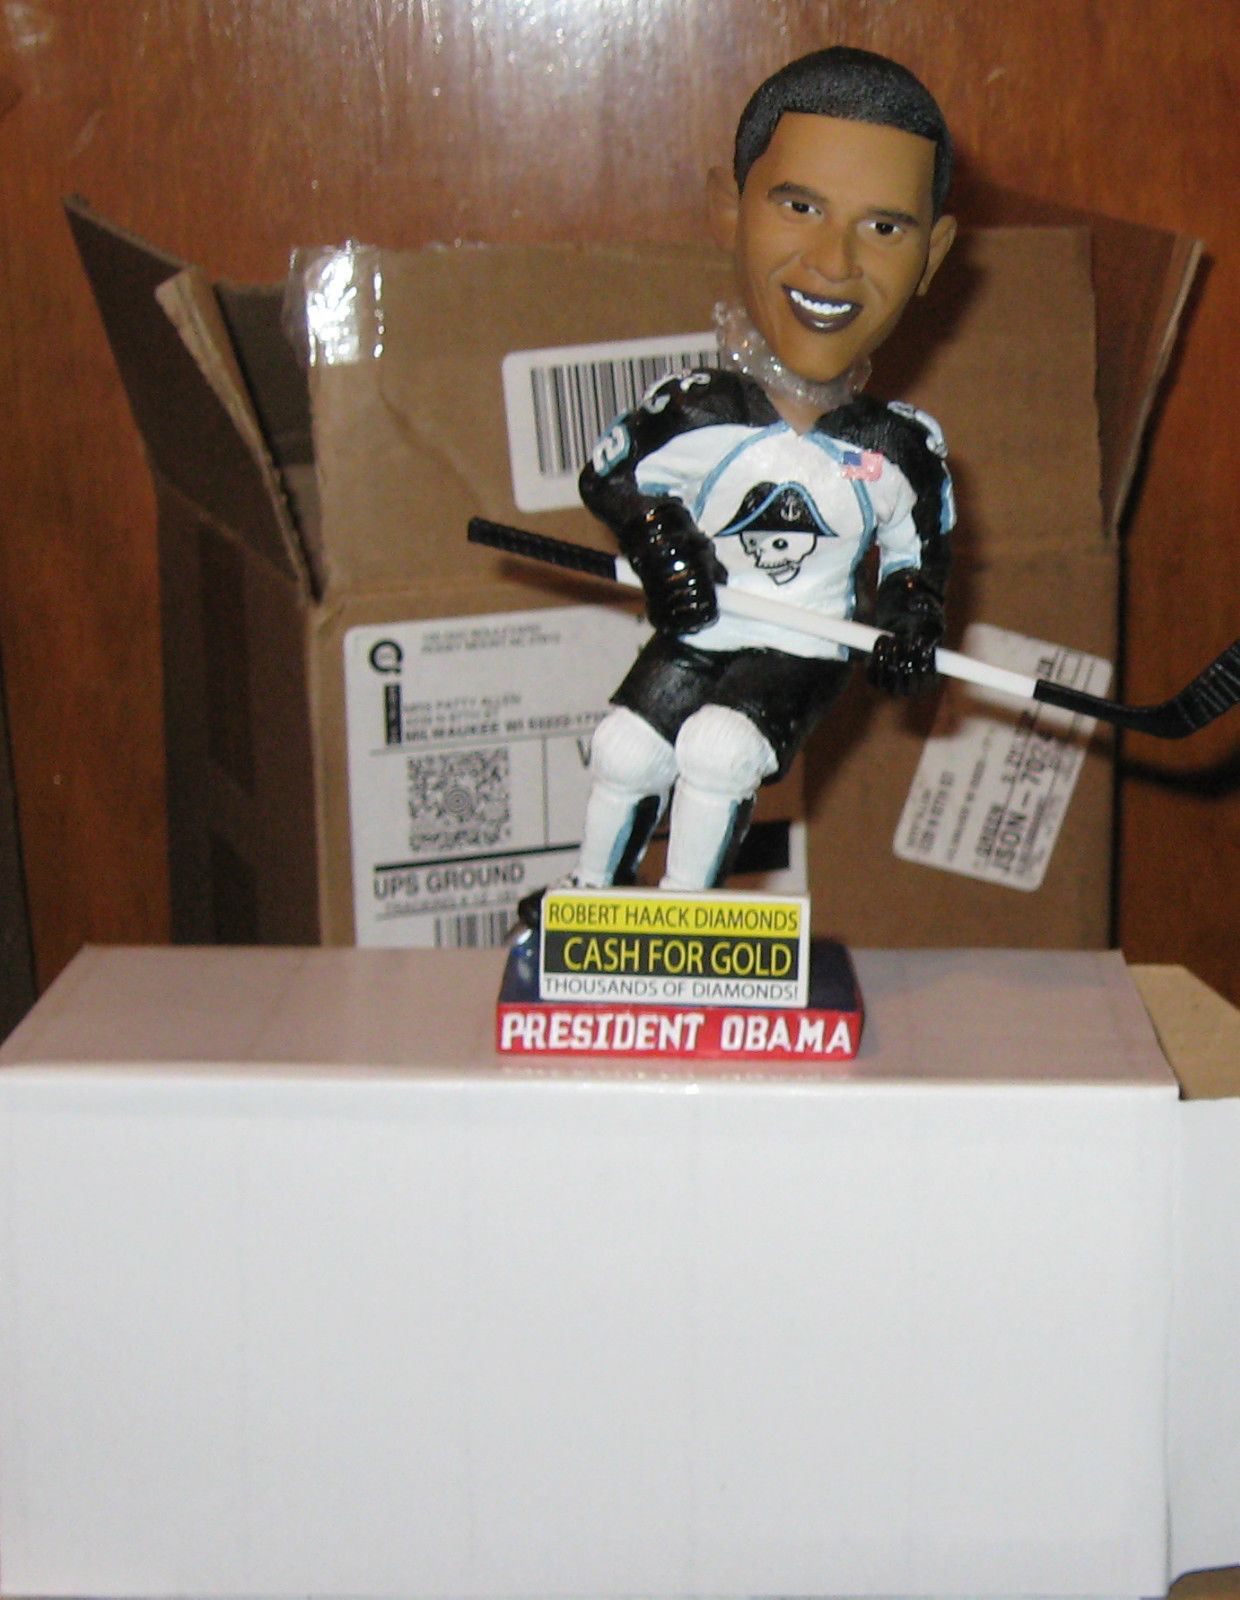 Obama as a Member of the Milwaukee Admirals